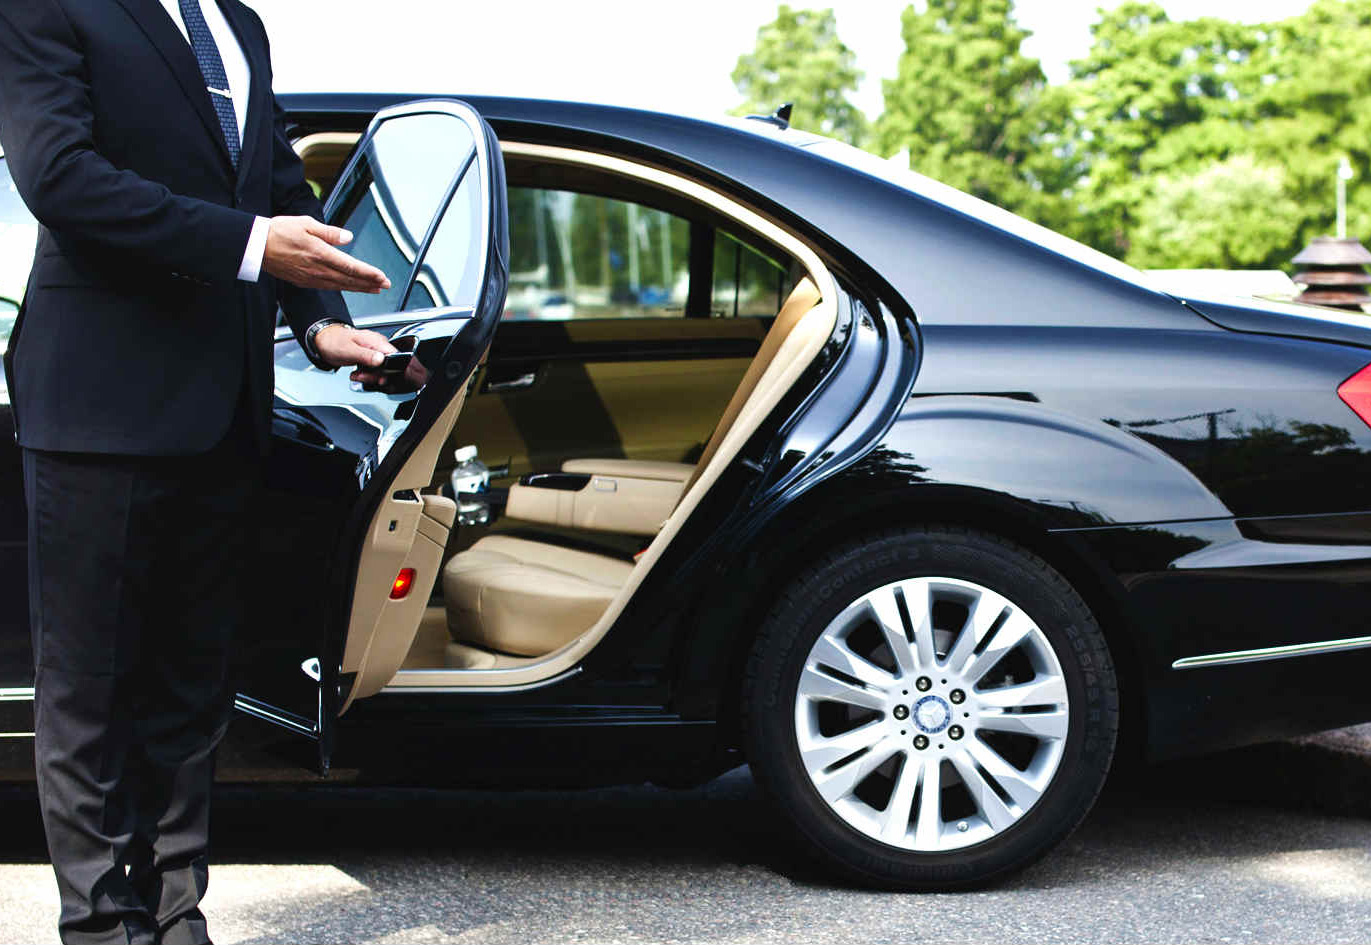 Best Of All Limousine Services Los Angeles